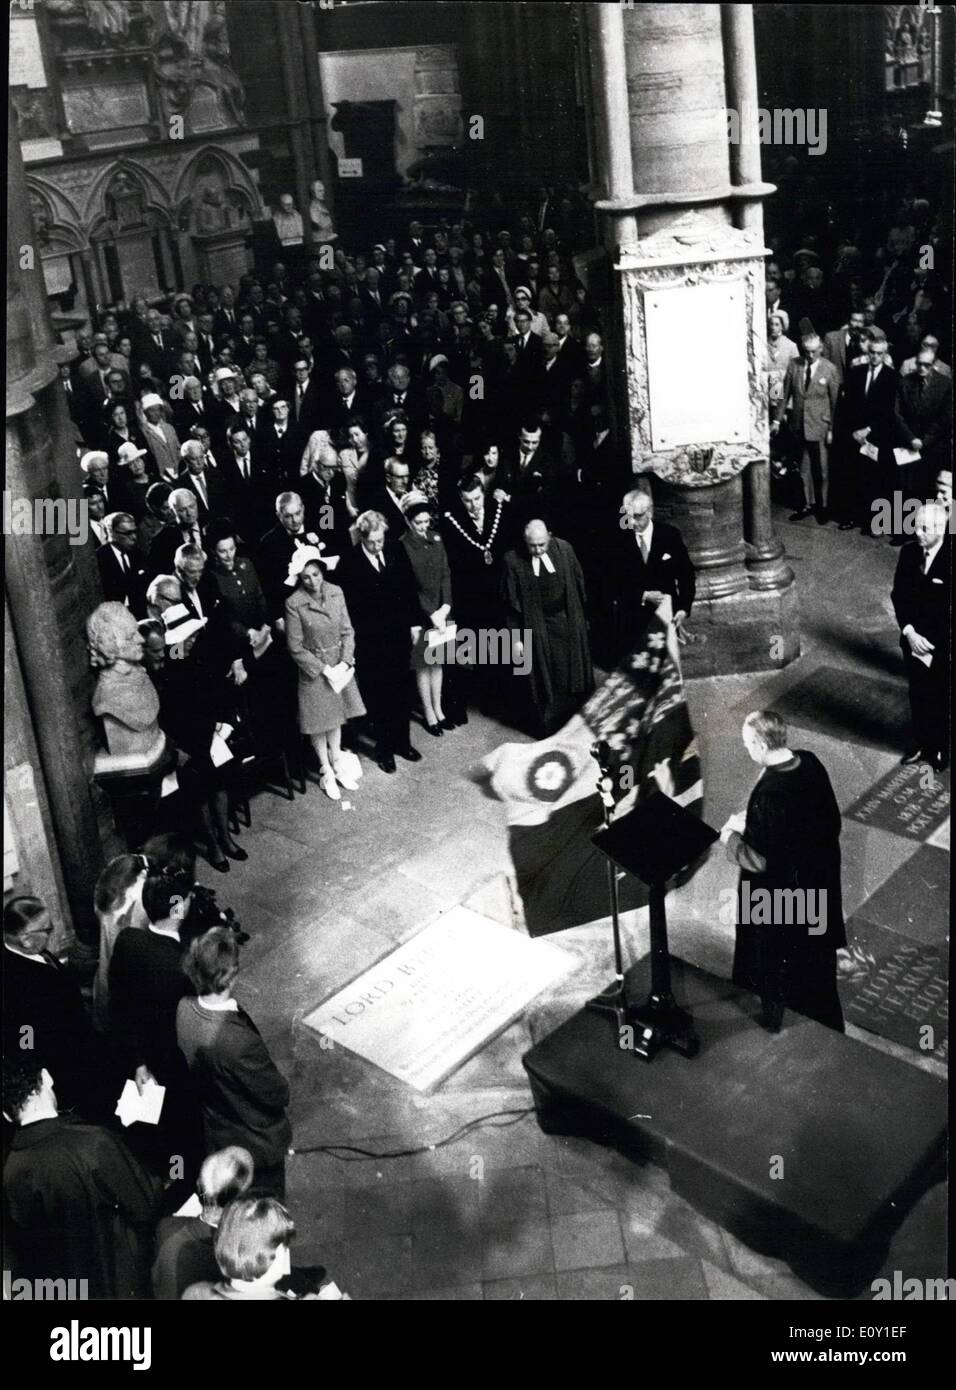 May 05, 1968 - The unveiling and dedication of the memorials to Lord Byron in Westminster Abbey.: A memorial to the famous poet, Lord Byron, was unveiled at a dedication derive in Westminster Abbey today by the President of the Poetry Society. Dr. William Plomer. Lord Byron today got the recognition many people have tried to get for him over half a century - a place in Poet's Corner in the Abbey. Byron who had a broken marriage, illegitimate children and a number of mistresses, died in Greece in 1824. Photo shows Dr Stock Photo